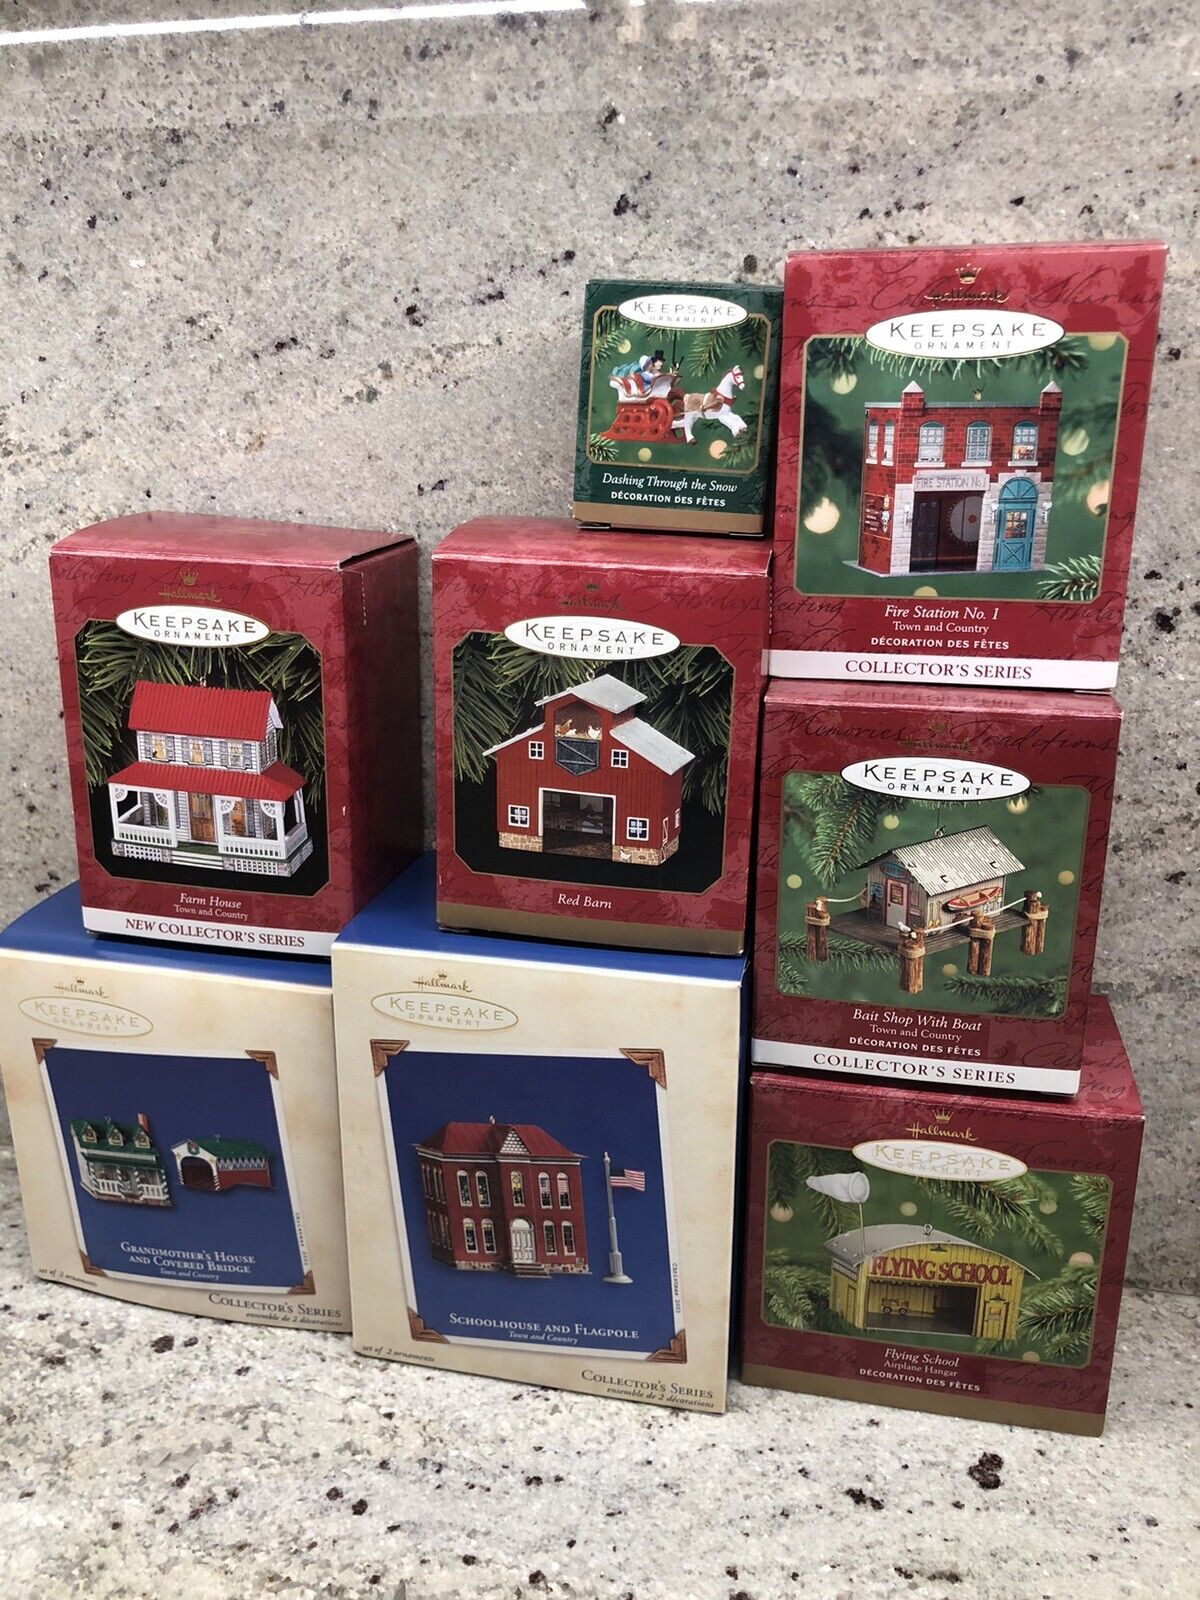 8 Hallmark Town And Country Metal Houses And Buildings Ornaments. Nostalgic.